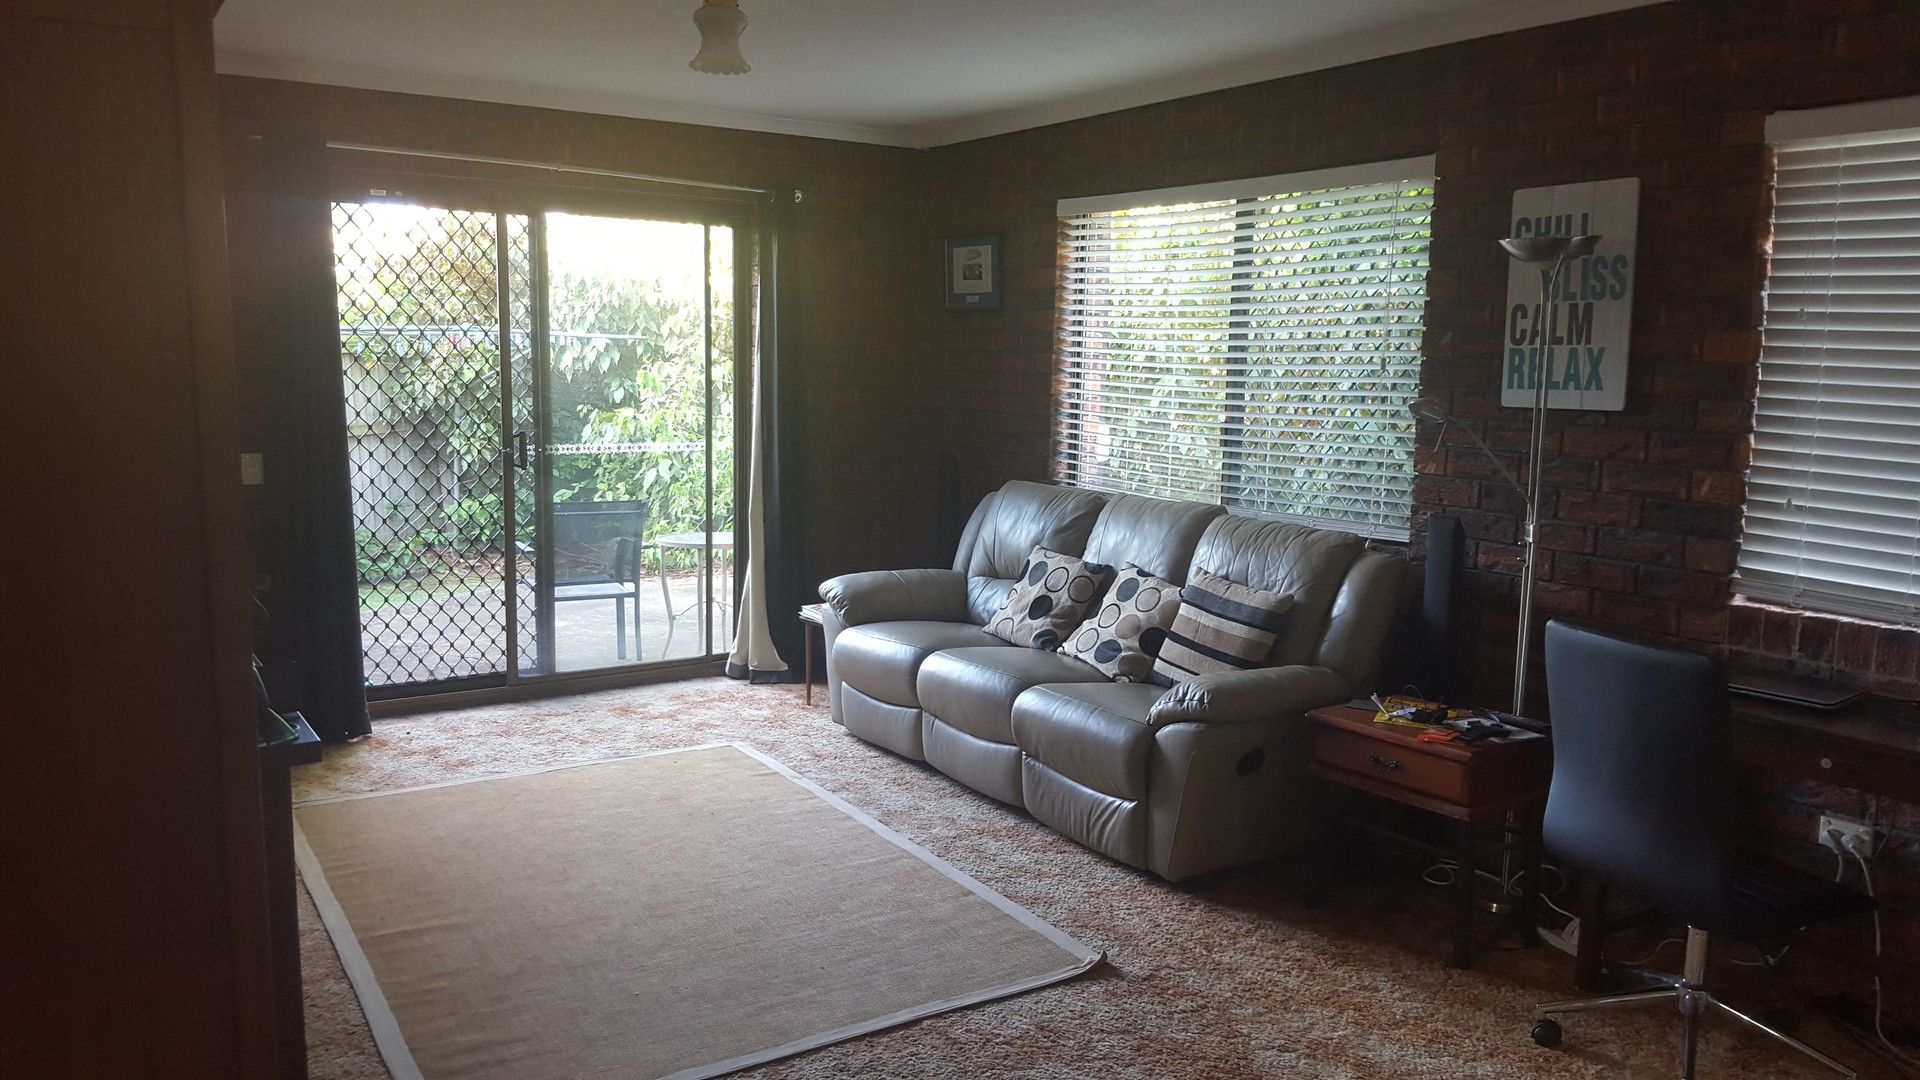 2 bedrooms House in 4/12 Dinmore Street DINMORE QLD, 4303